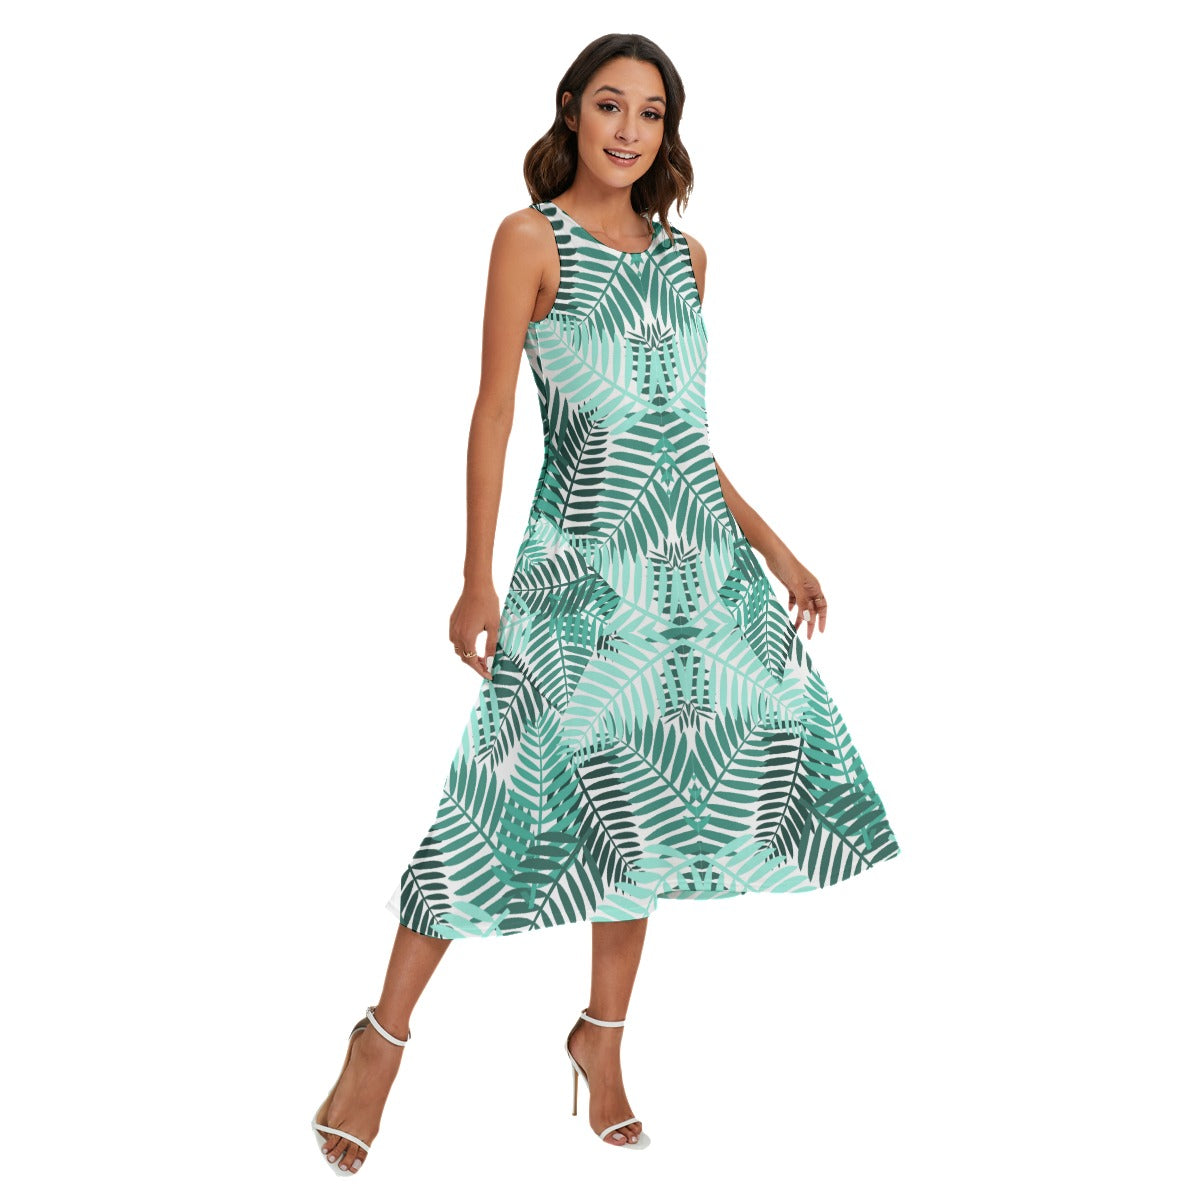 Women's Casual Formal Rainforest Print Dress with Diagonal Pockets